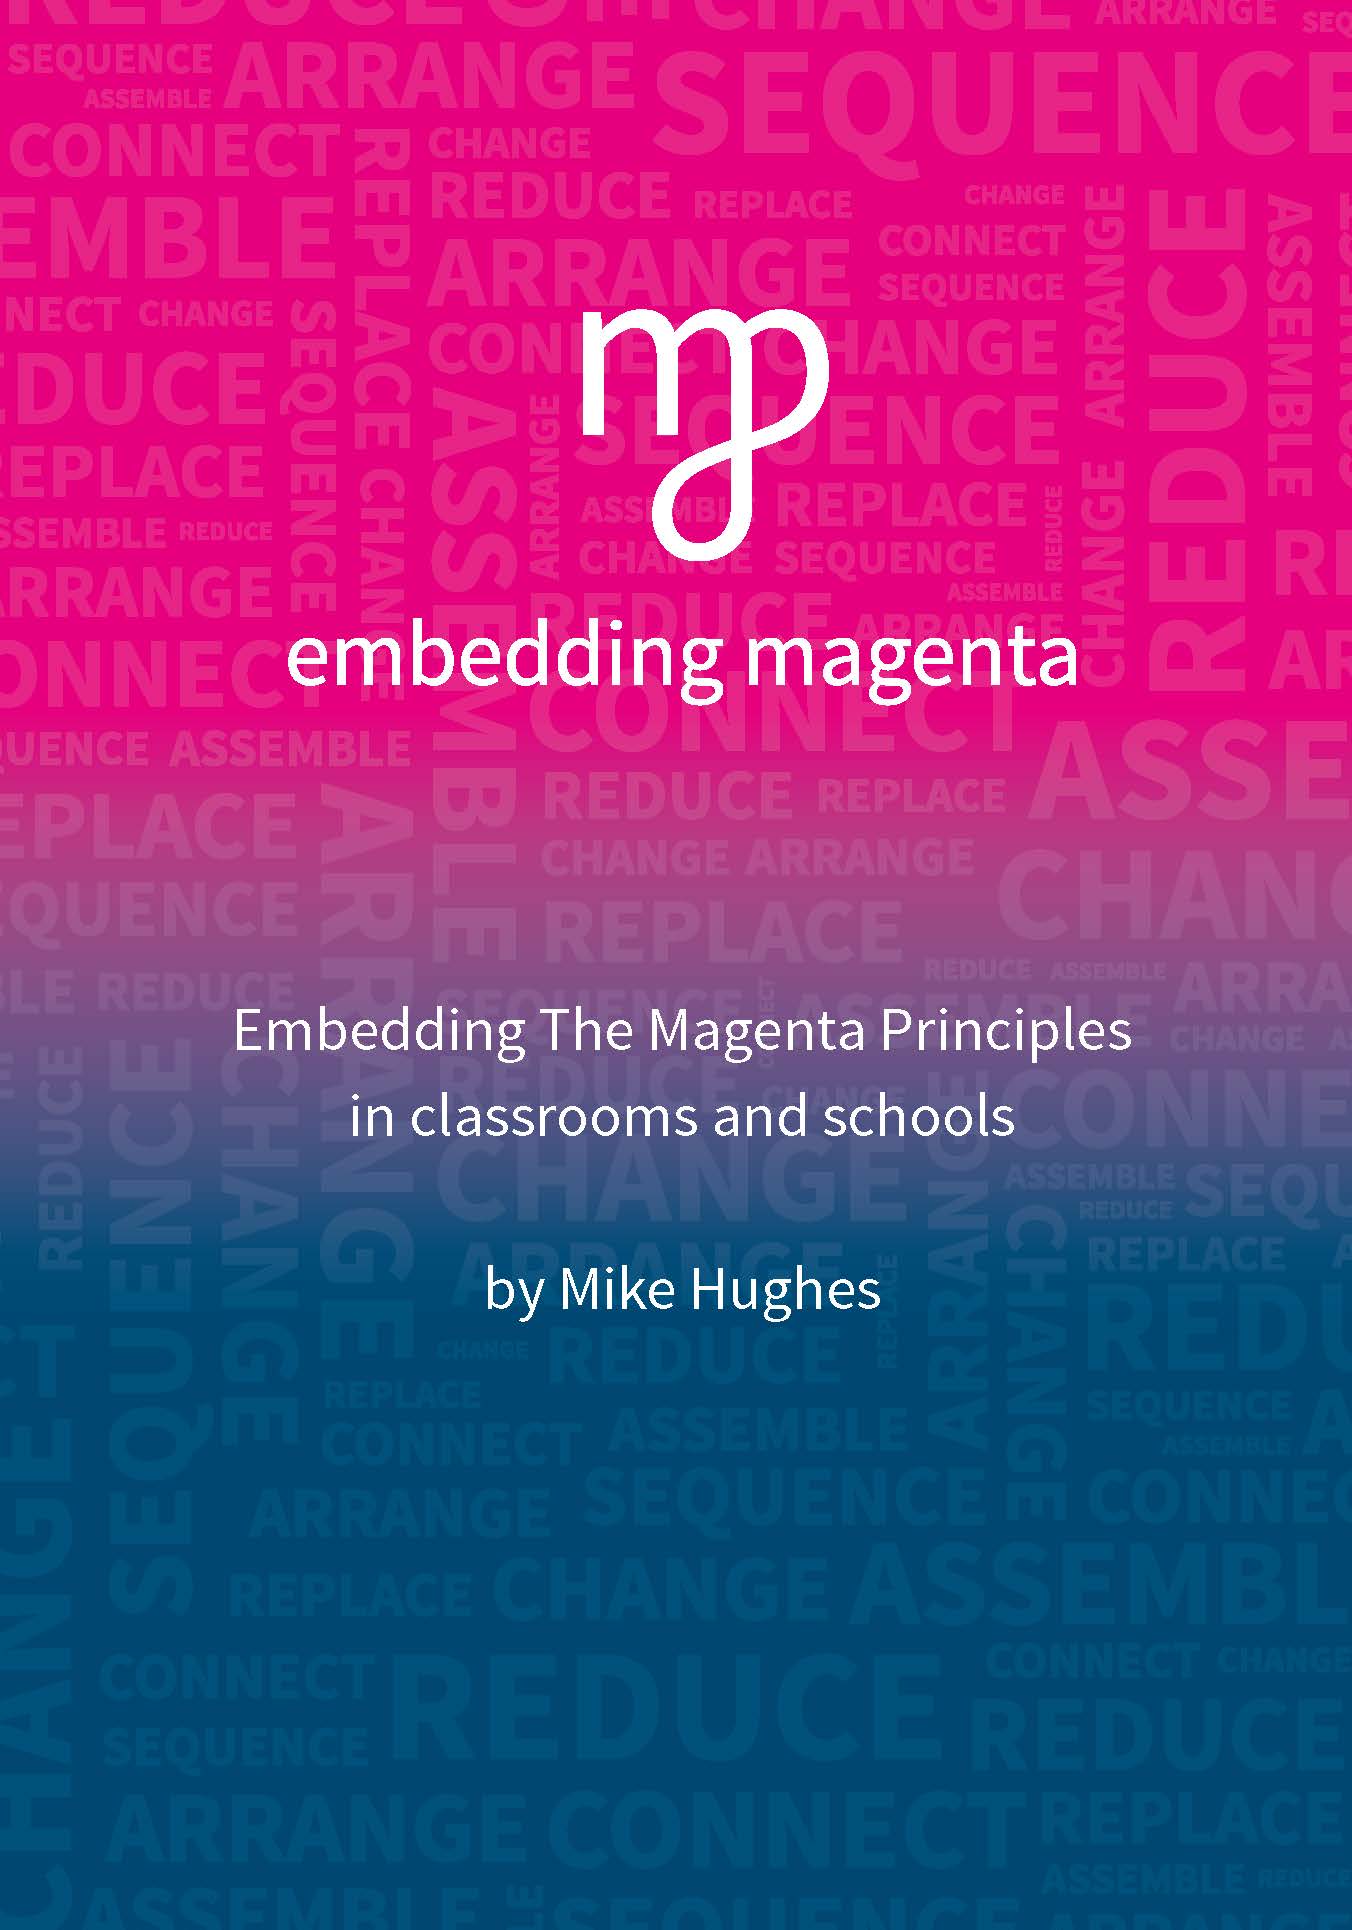 Buy Now - Mike Hughes ETS Education, Training, and Support - The Magenta Principles